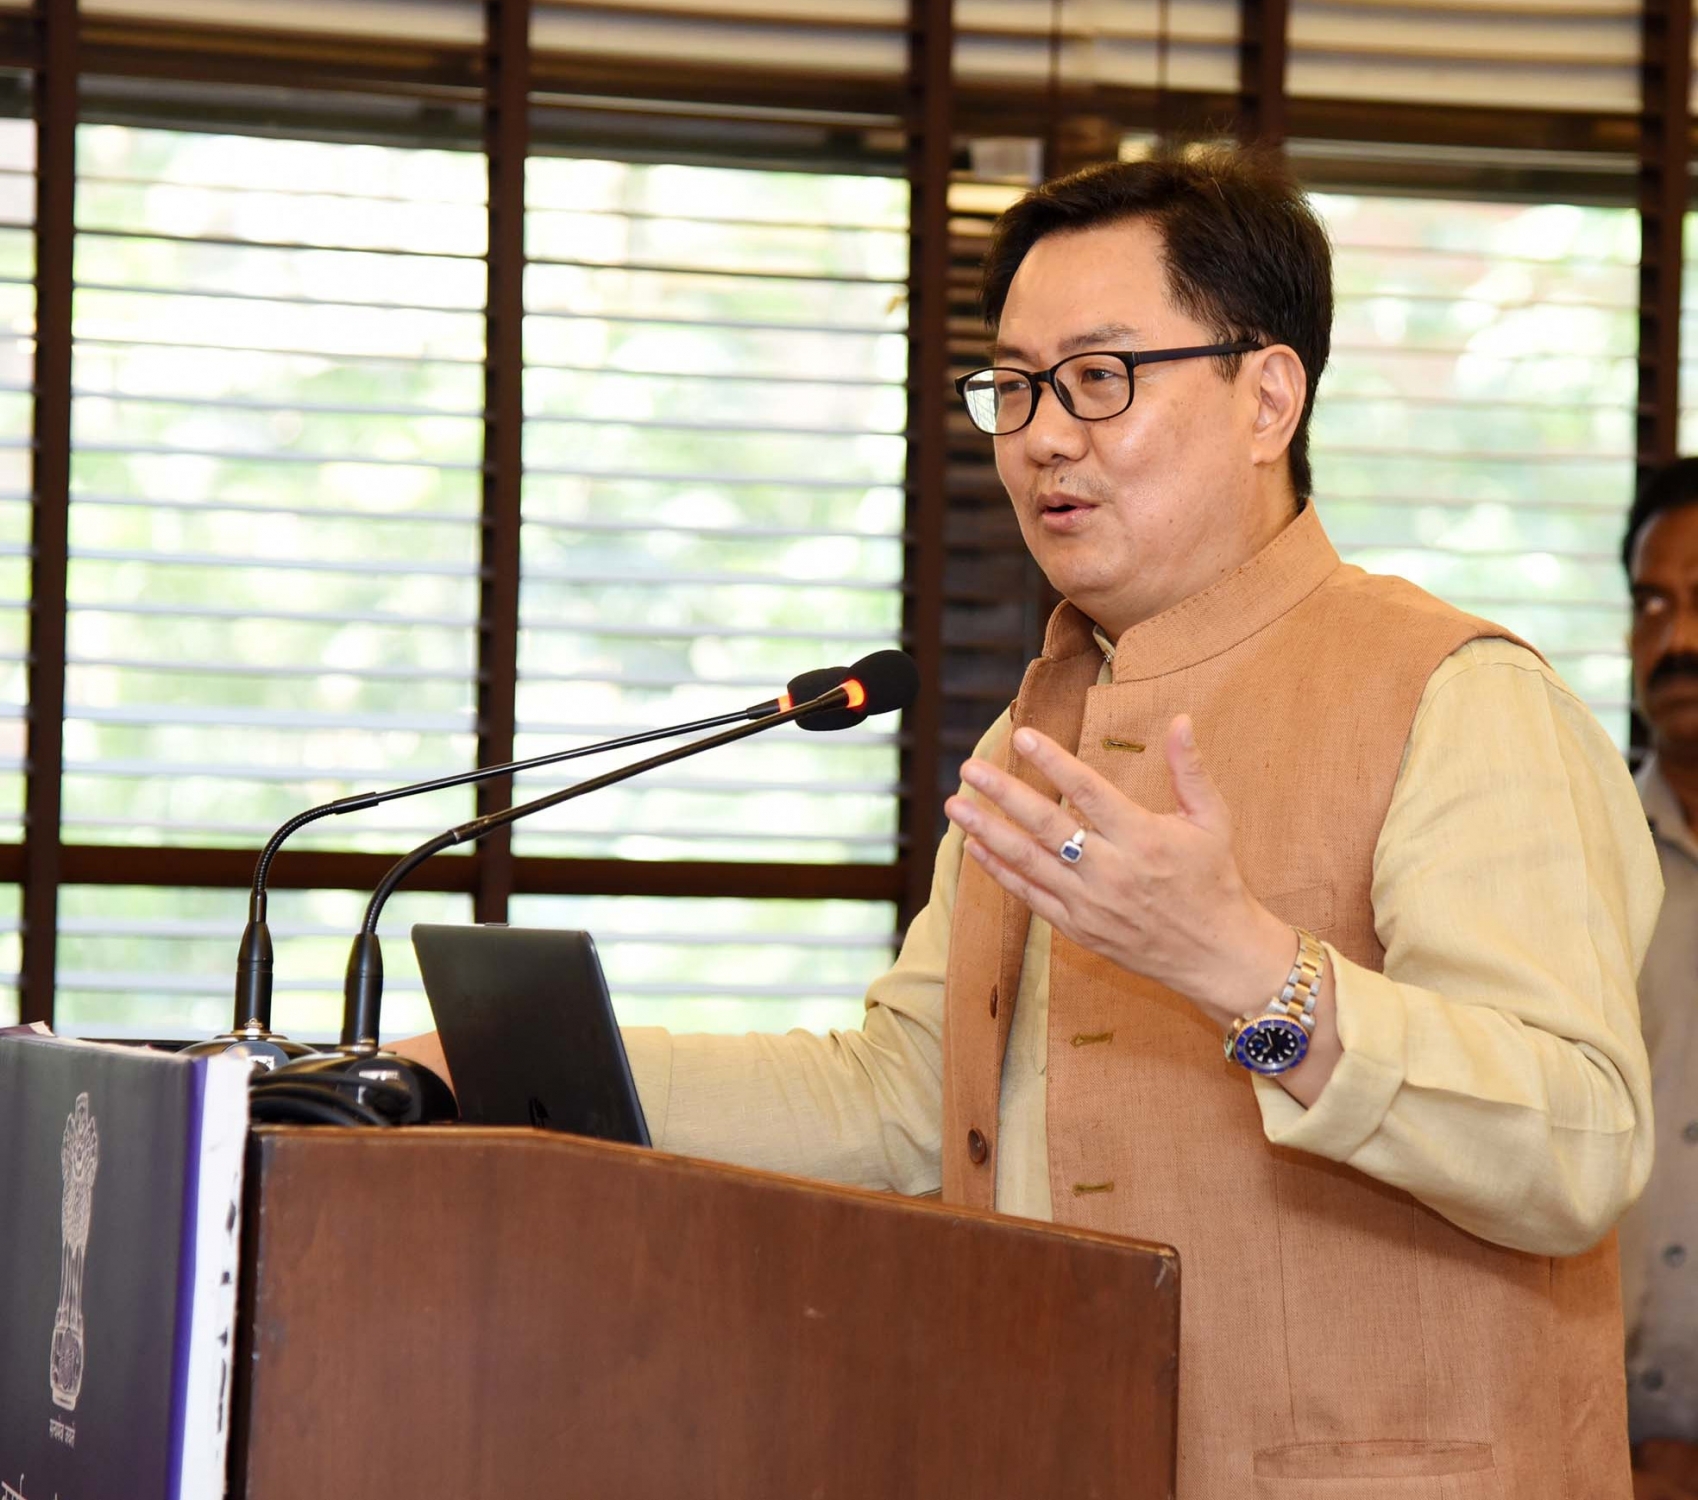 Kiren Rijiju says Sports will be part of curriculum in new education policy